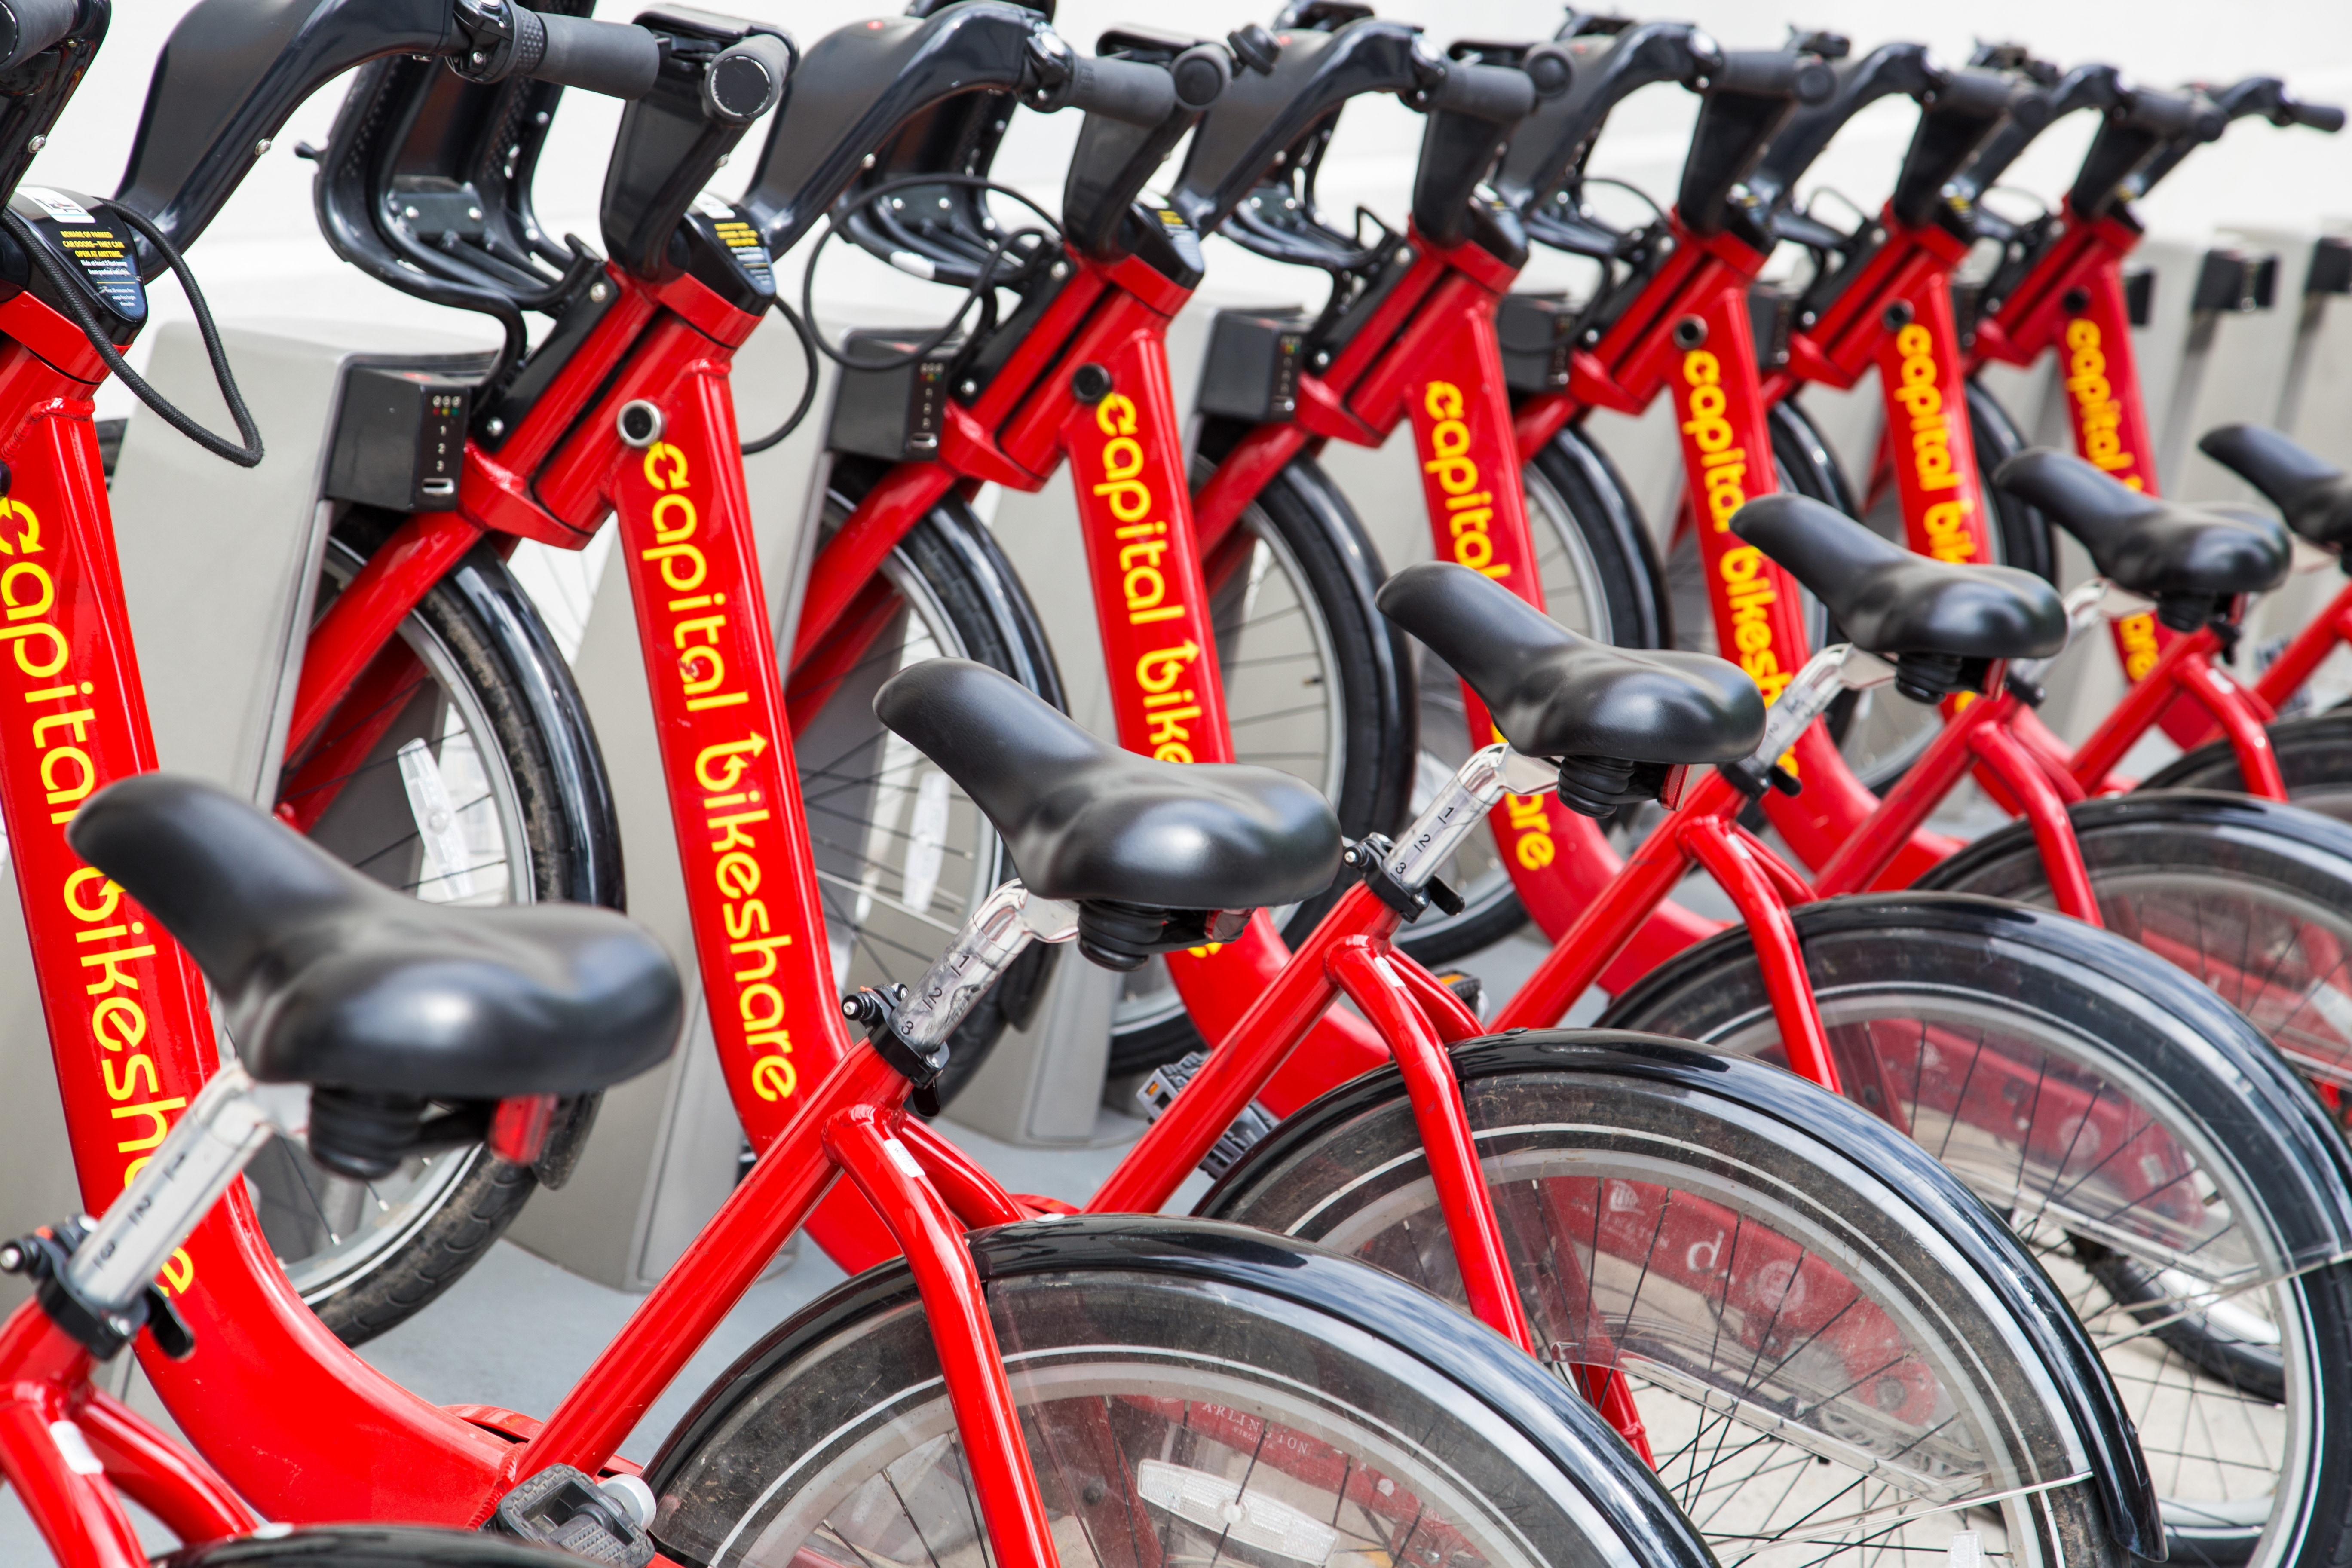 6 red capital bikeshare bicycles